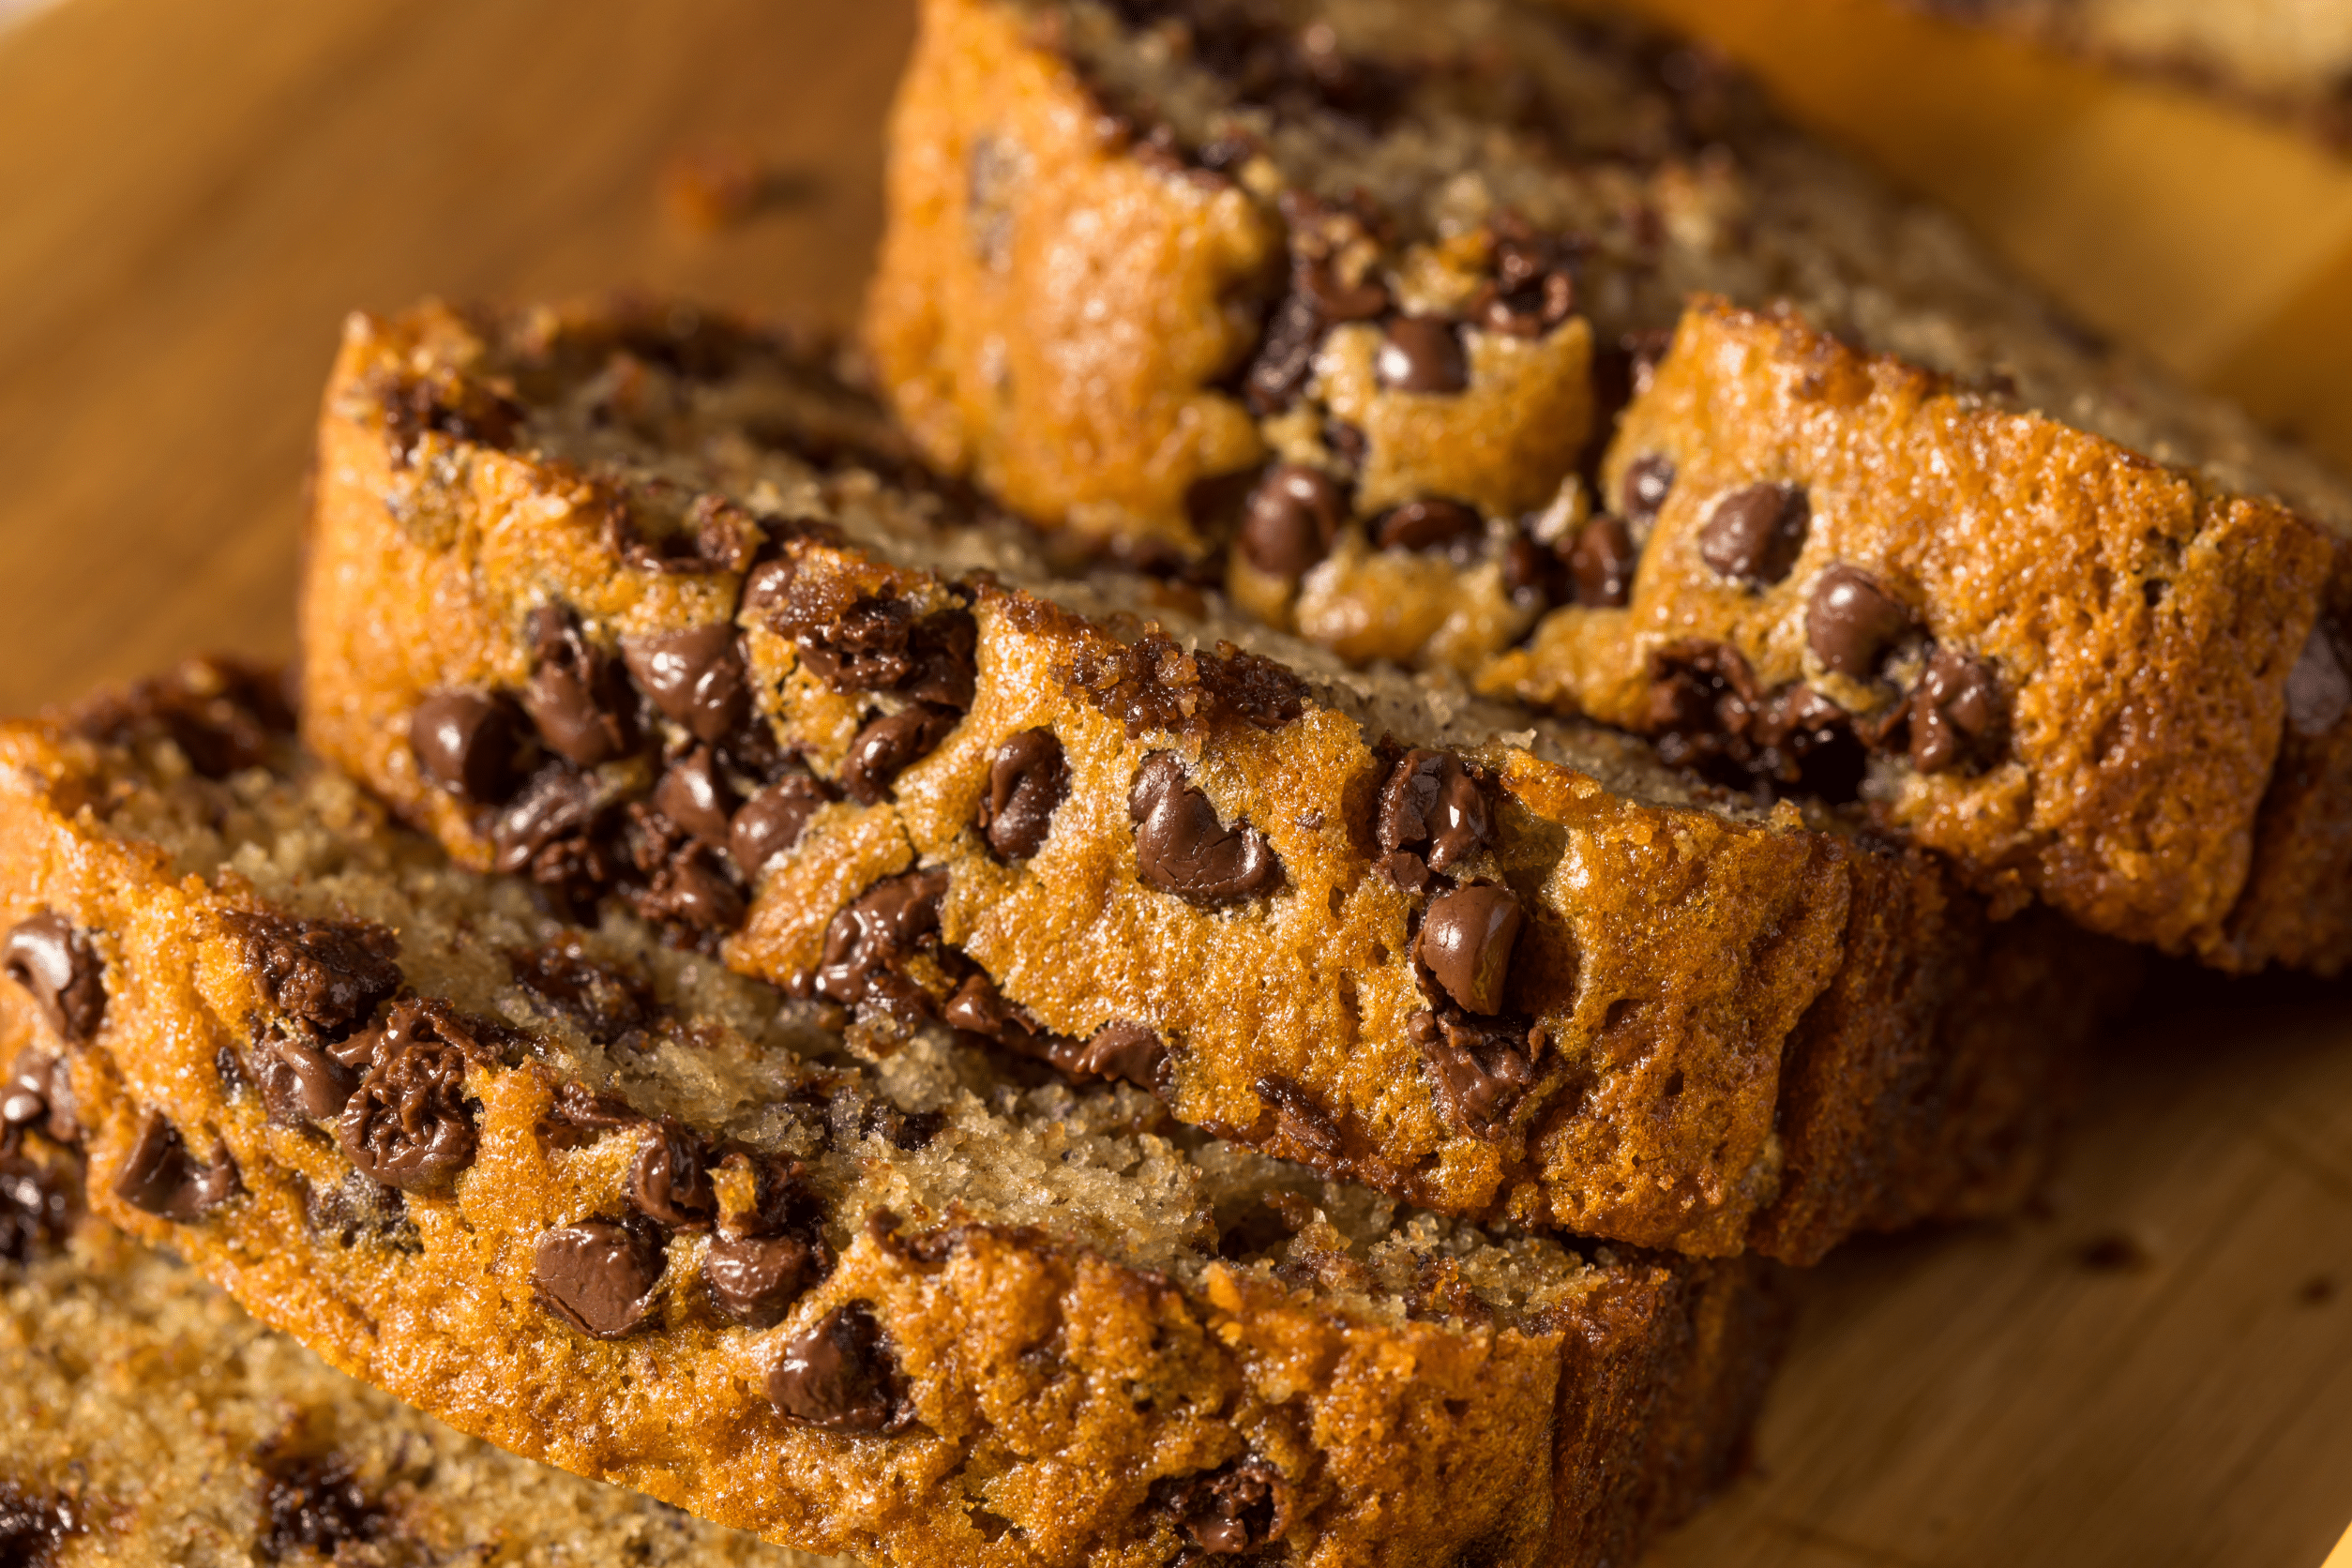 Freshly baked banana bread studded with chocolate chips